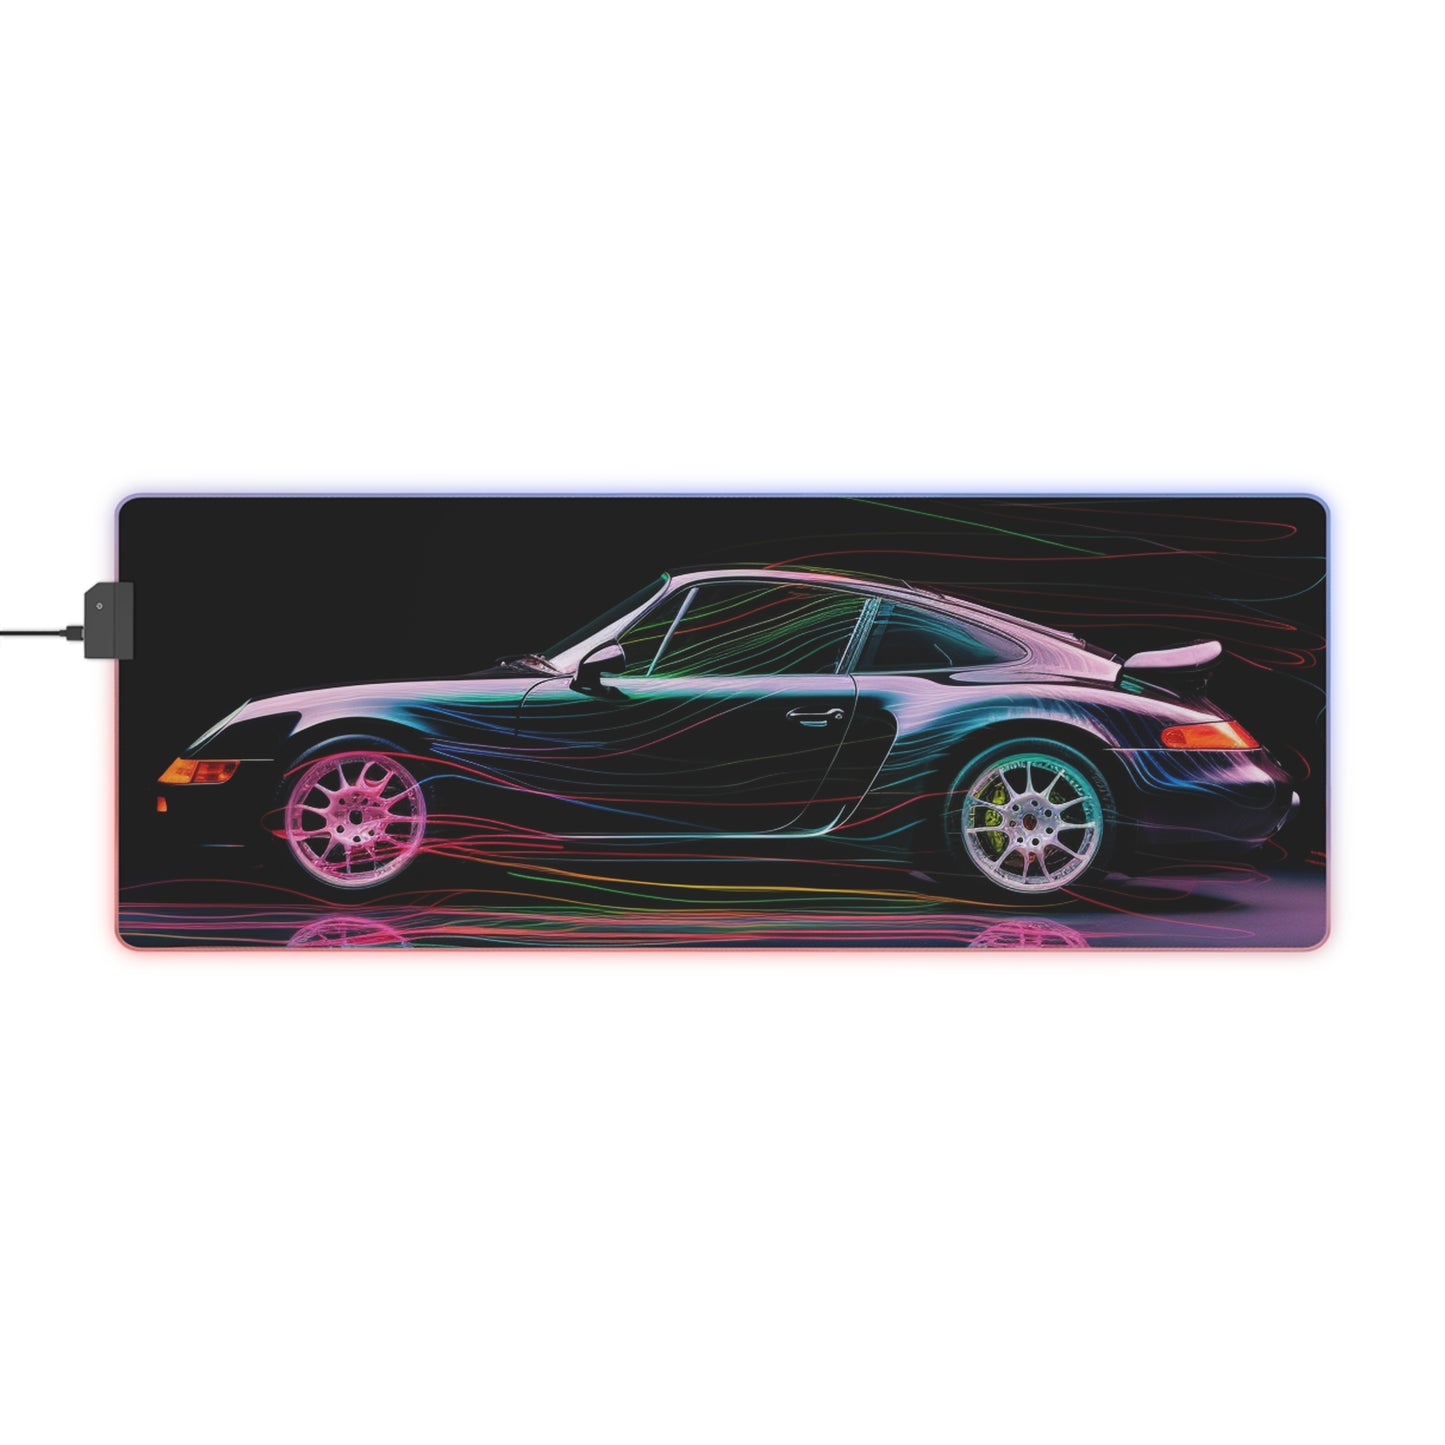 LED Gaming Mouse Pad Porsche 933 1